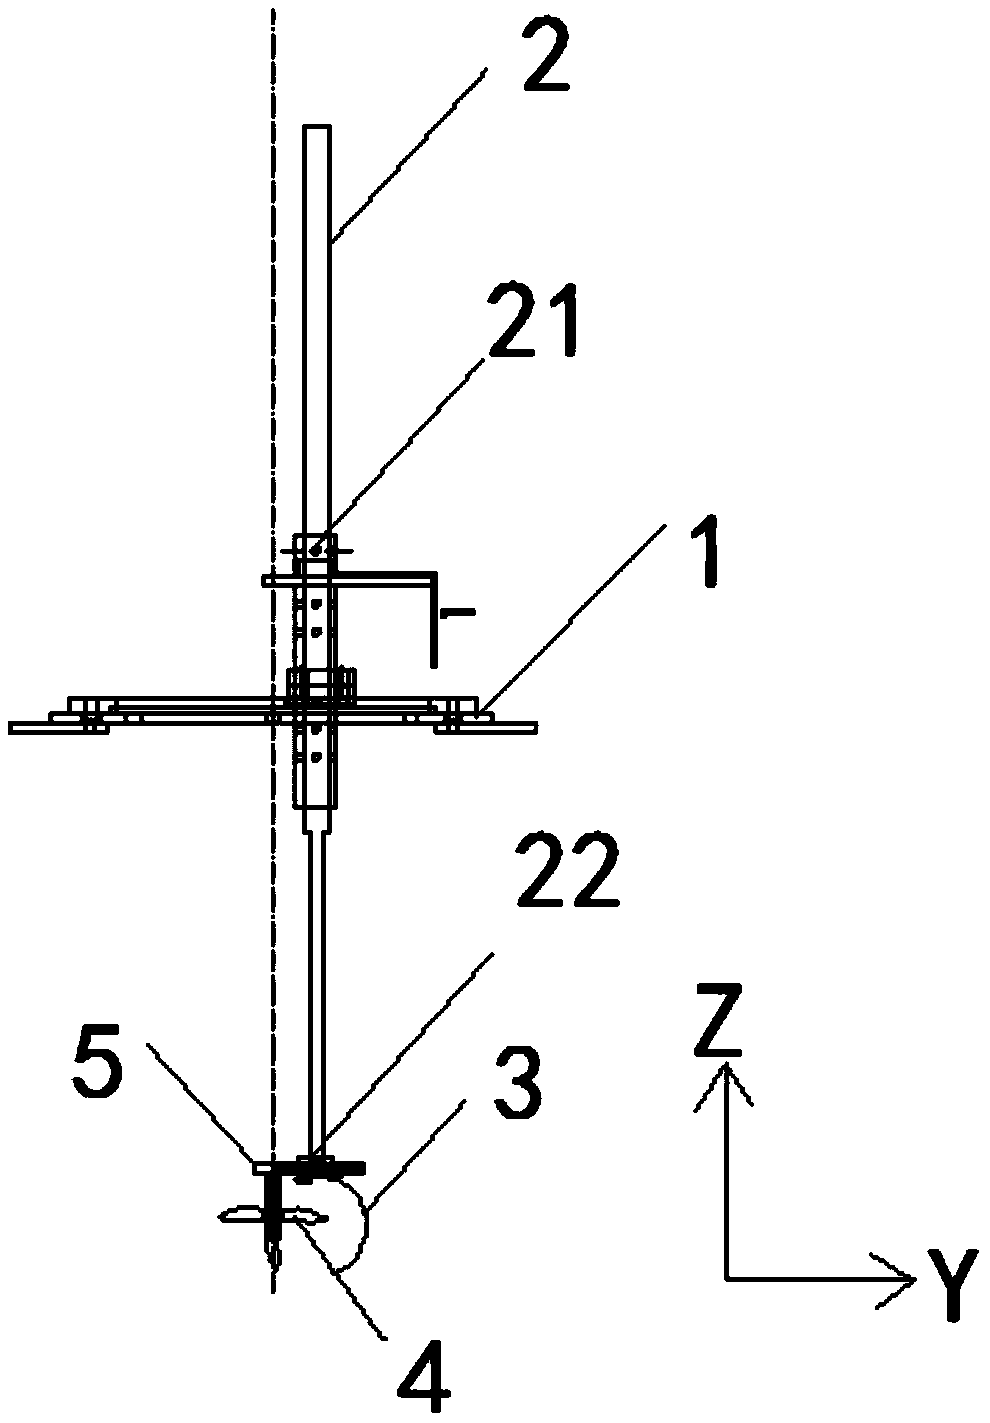 A test device and installation method for precise positioning of propeller front compensation conduit